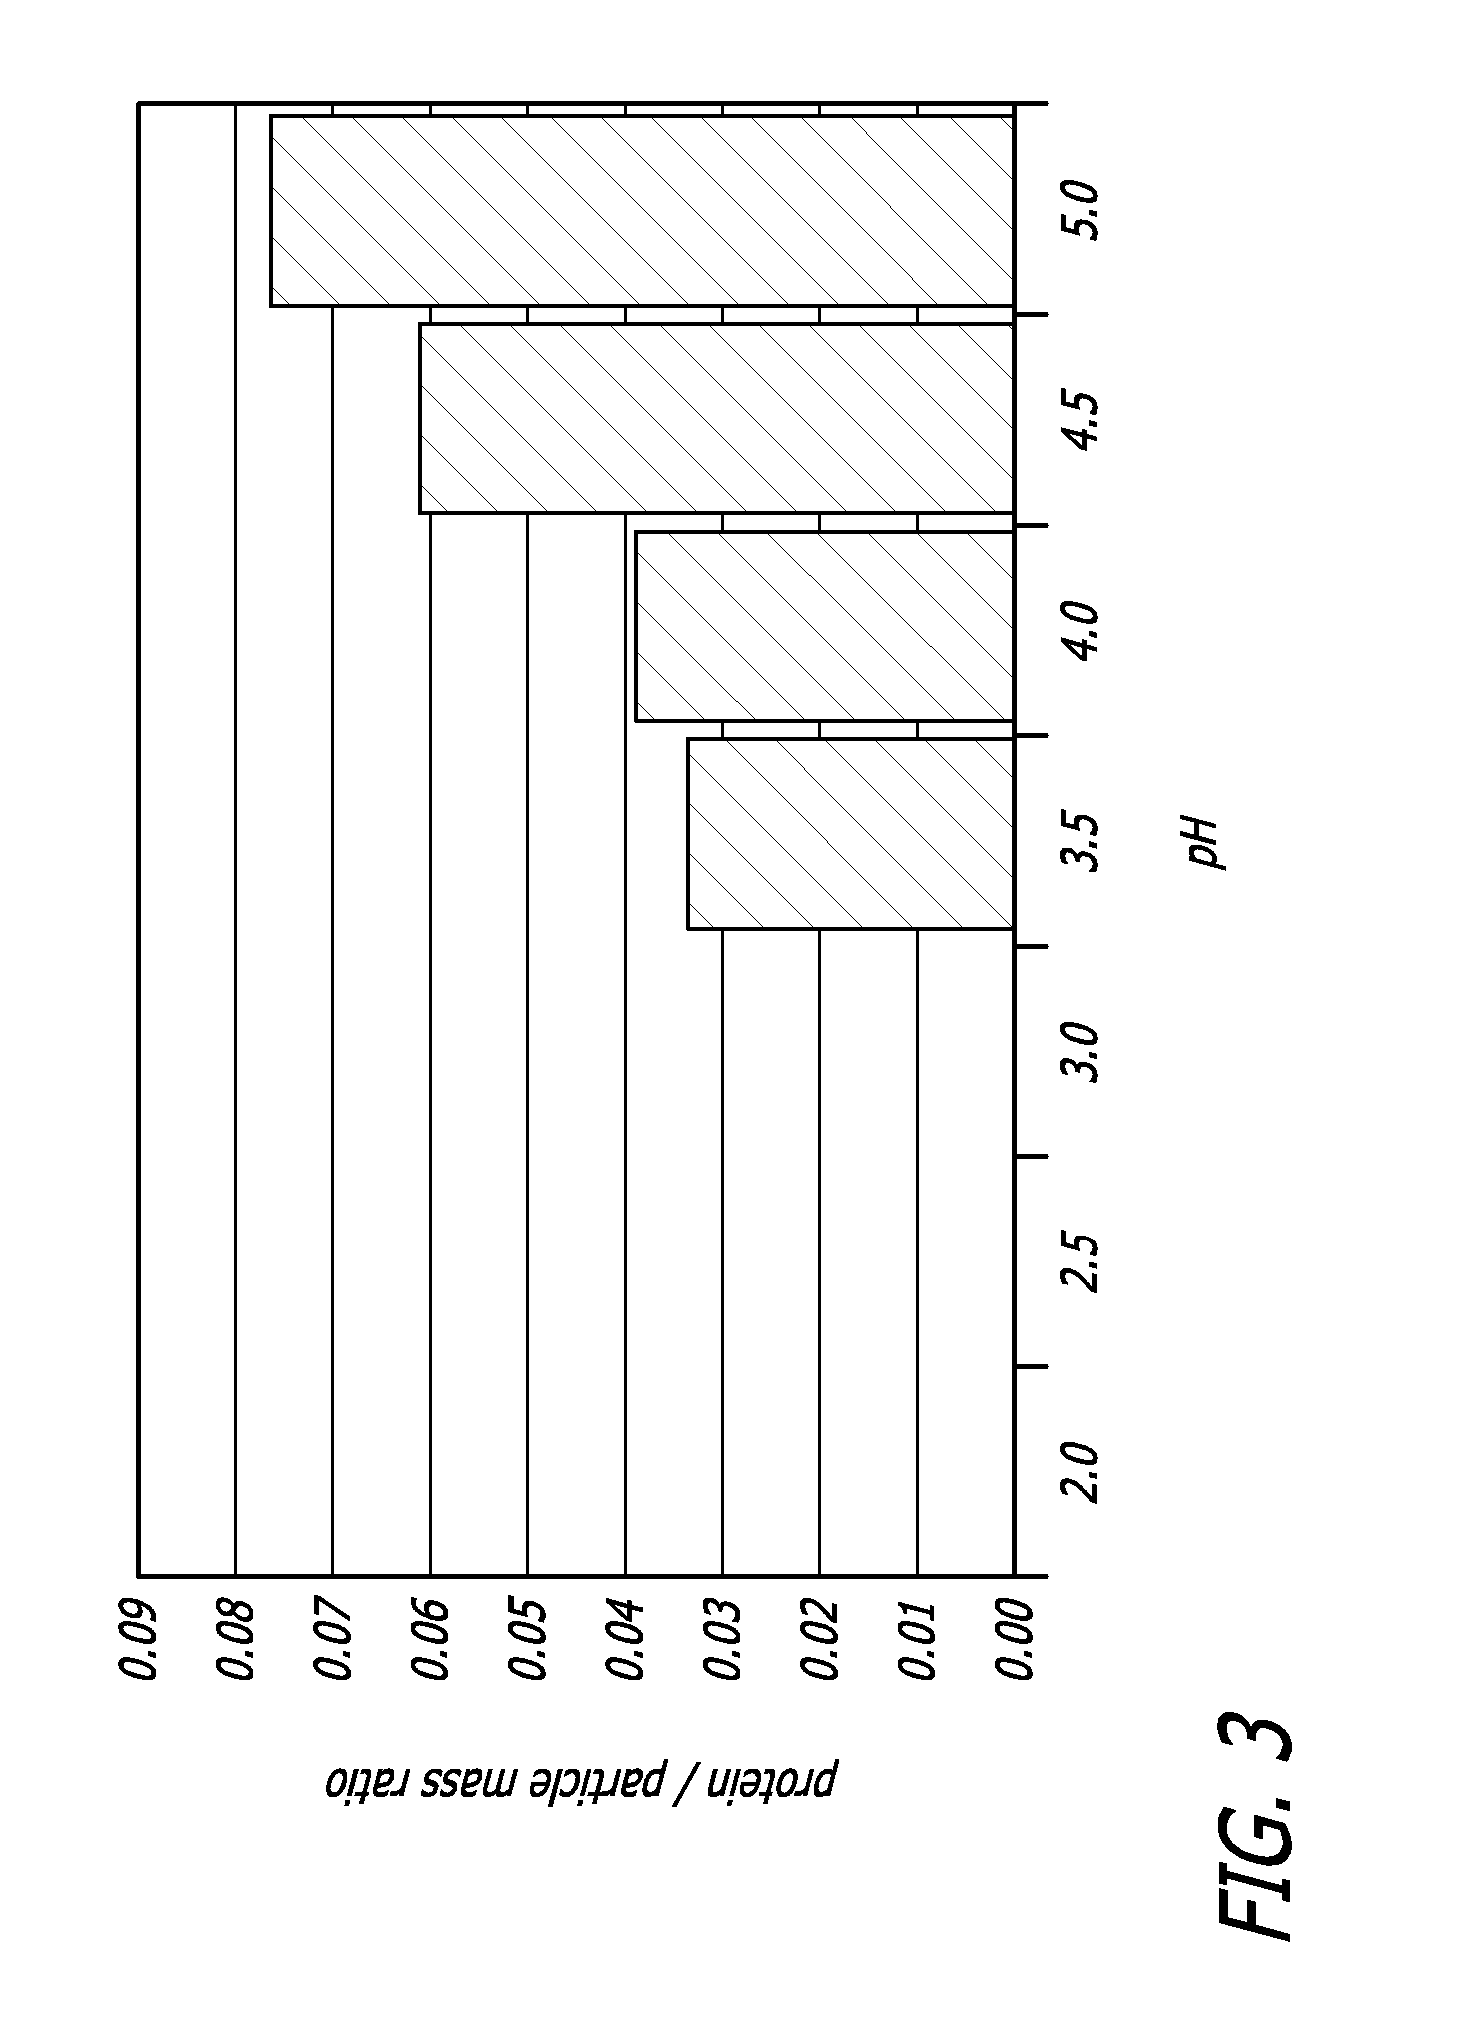 Method of Drug Formulation Based on Increasing the affinity of Crystalline Microparticle Surfaces for Active Agents